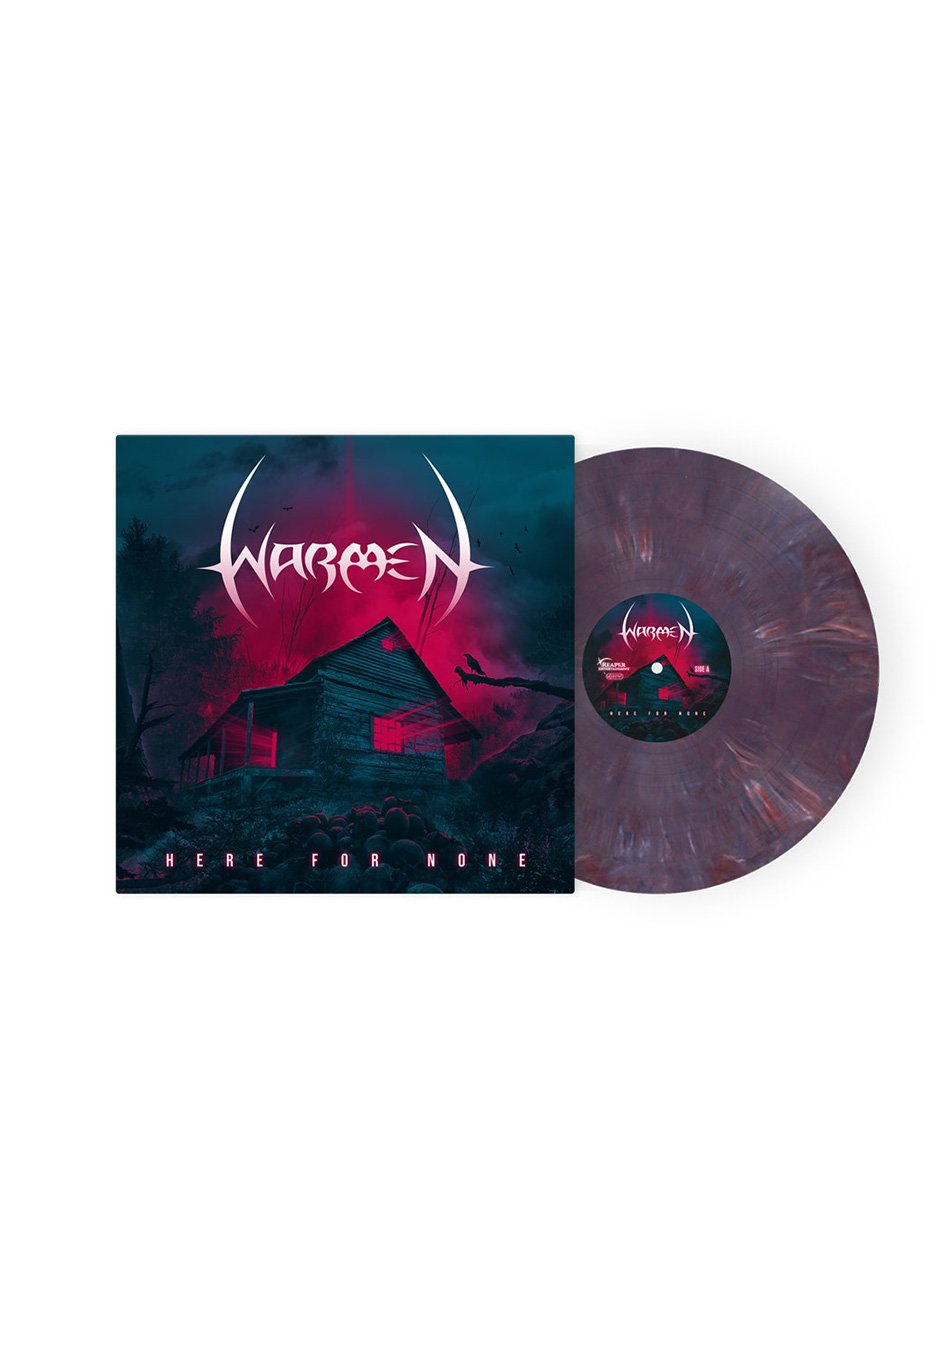 Warmen - Here For None Red/Blue/White - Marbled Vinyl